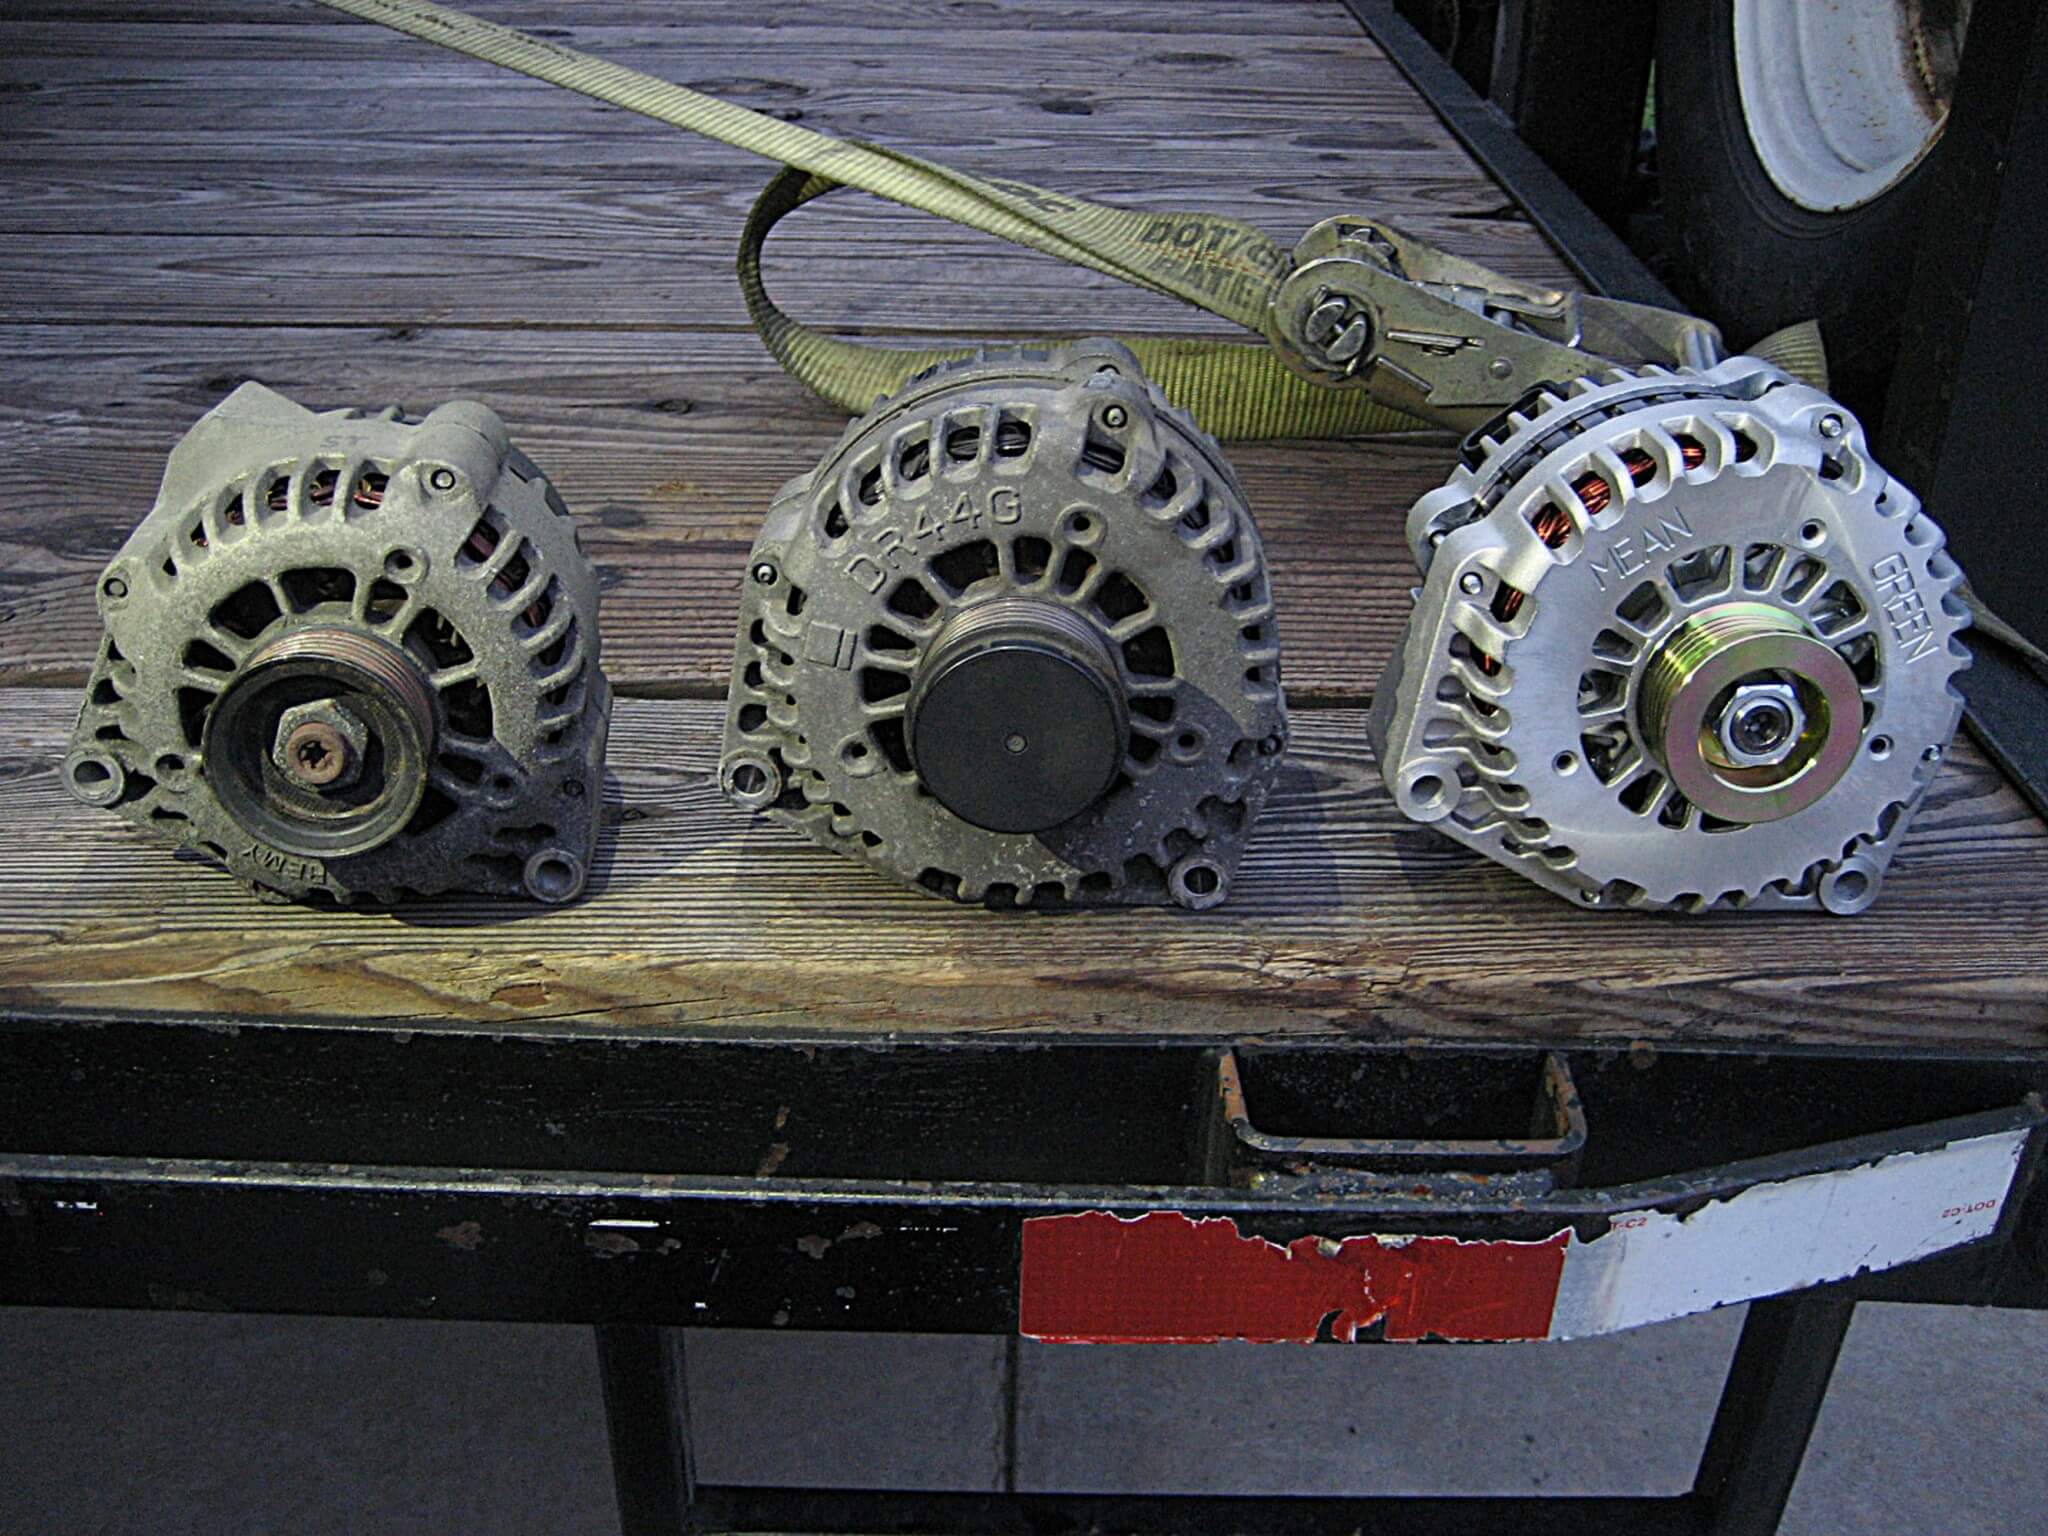 1. Here you can see the stock OEM alternator on the left. In the middle is the stock-type upgraded alternator. On the right is the new Mean Green (MG) high-output alternator. The MG unit puts out about two and a half times the amperage of the small OEM unit and 100 amps more than the larger, special order option OEM unit. 